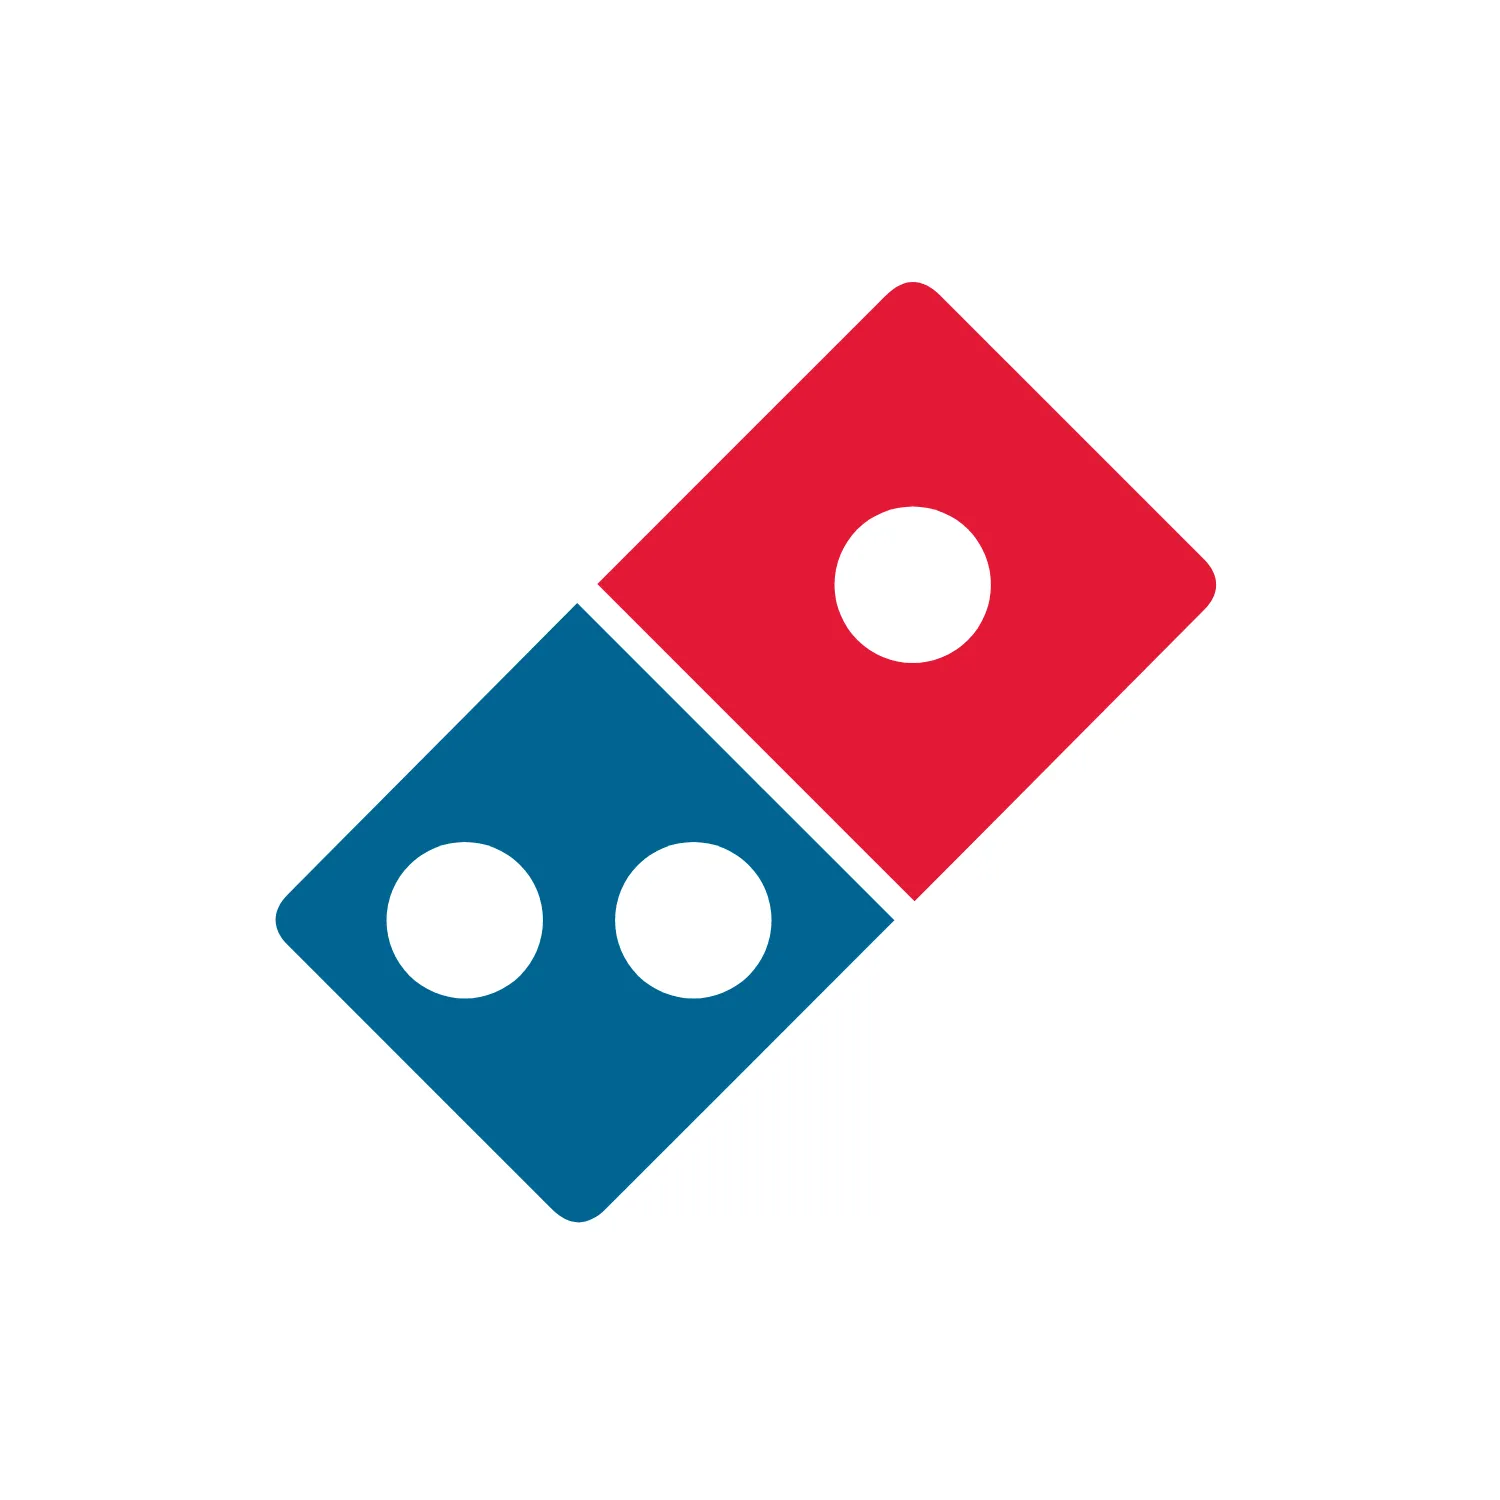 Database of Domino’s Pizza Locations in the United States